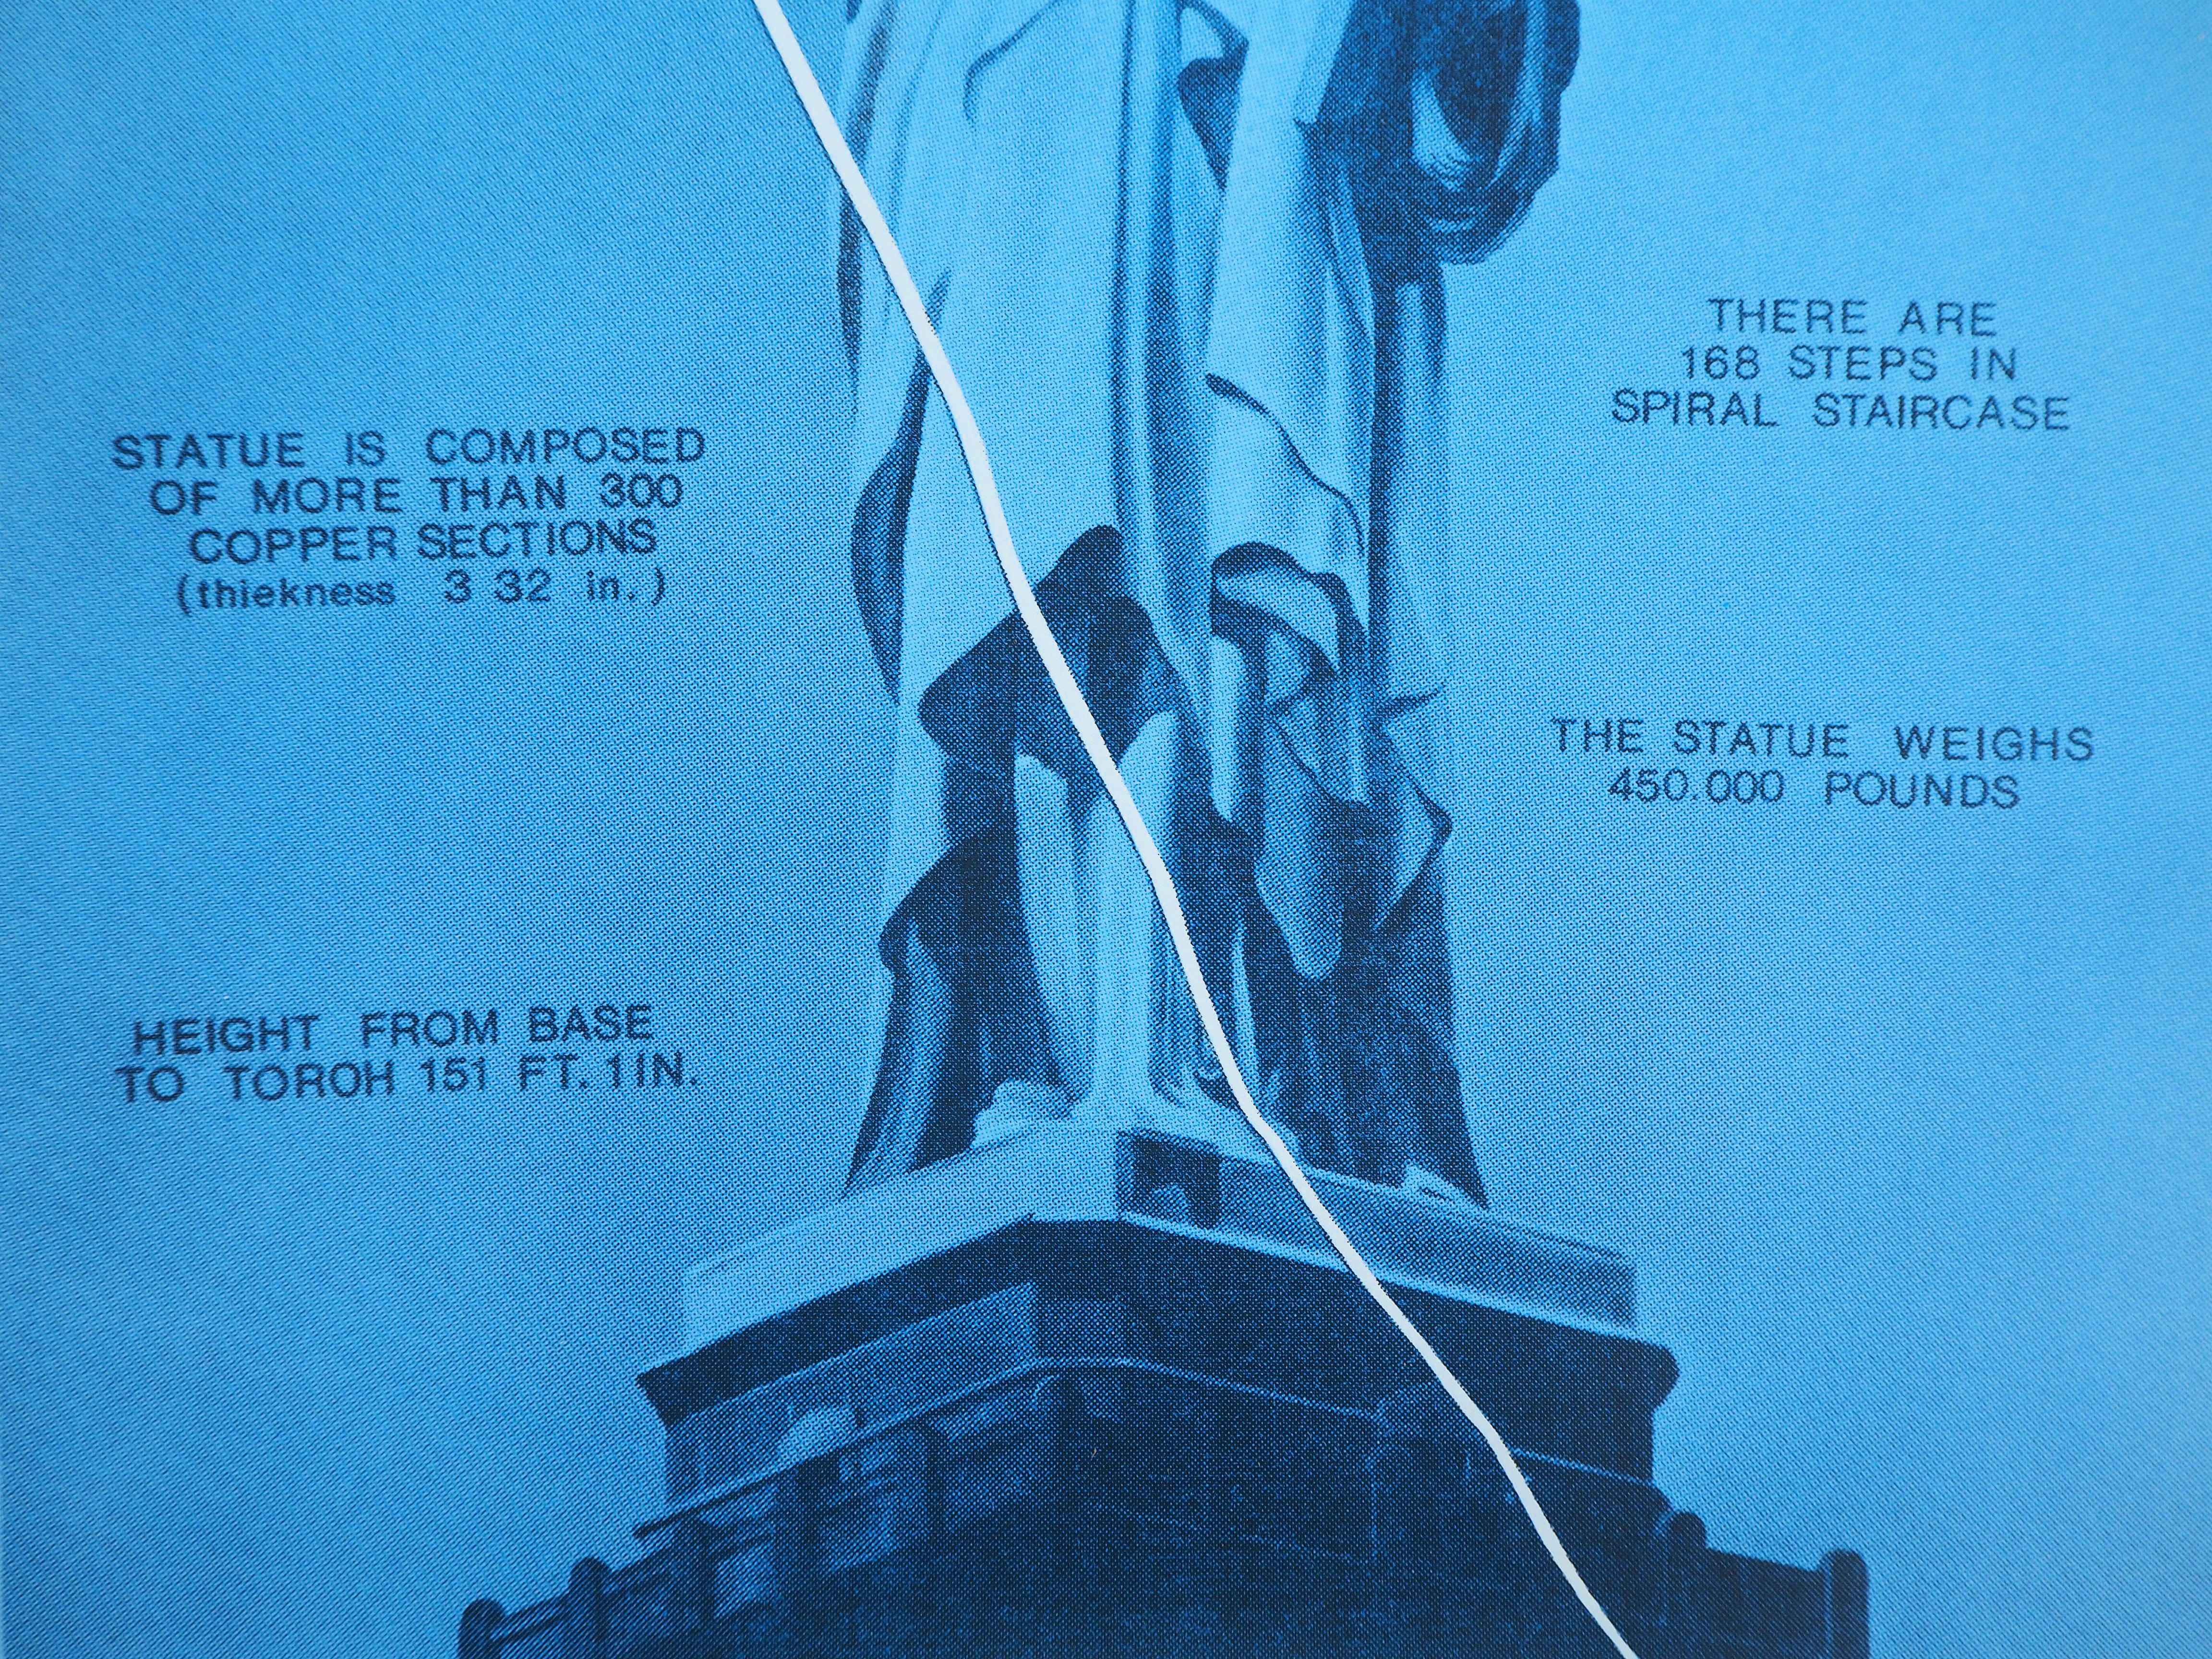 New-York : Statue of Liberty - Original Screenprint, Handsigned - Blue Landscape Print by Jacques Monory